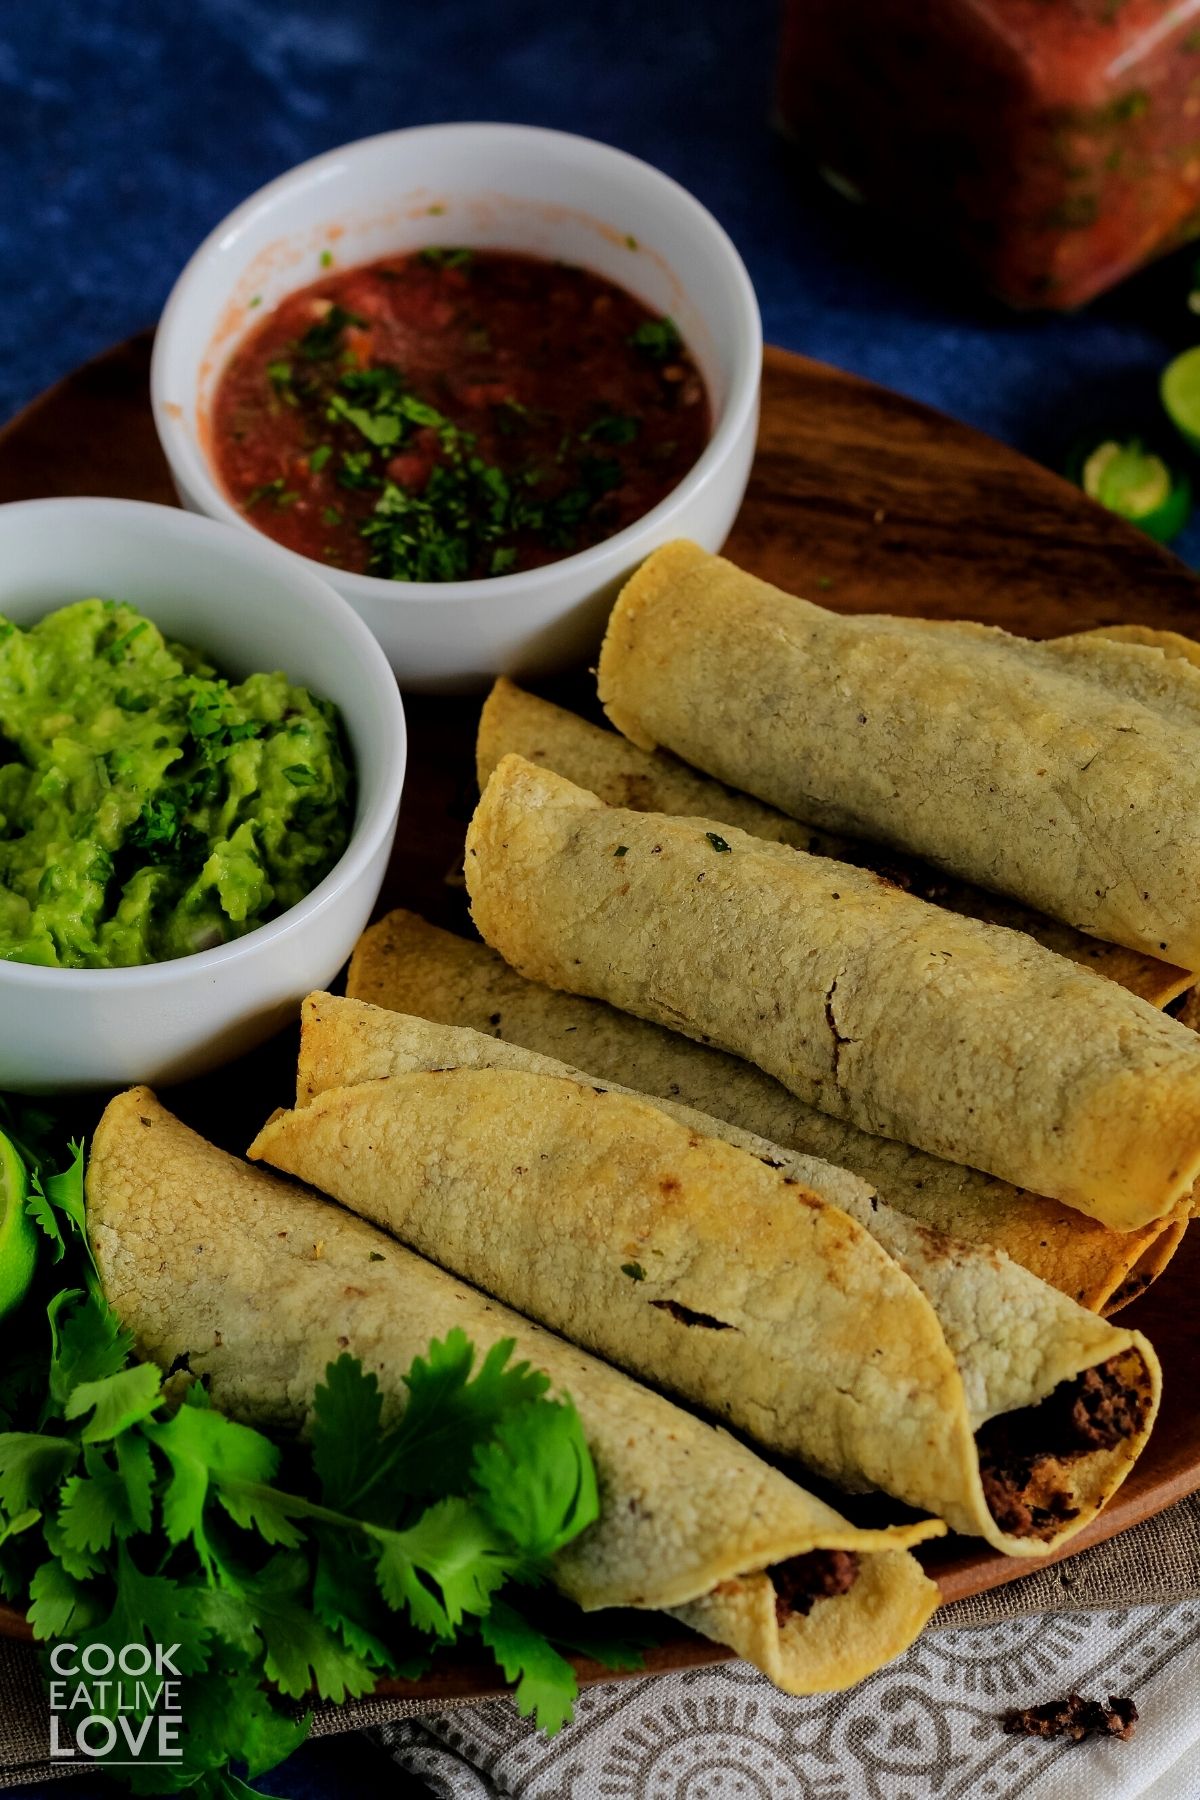 Vegan taquitos on a platter on the table with bowls of salsa and guacamole.